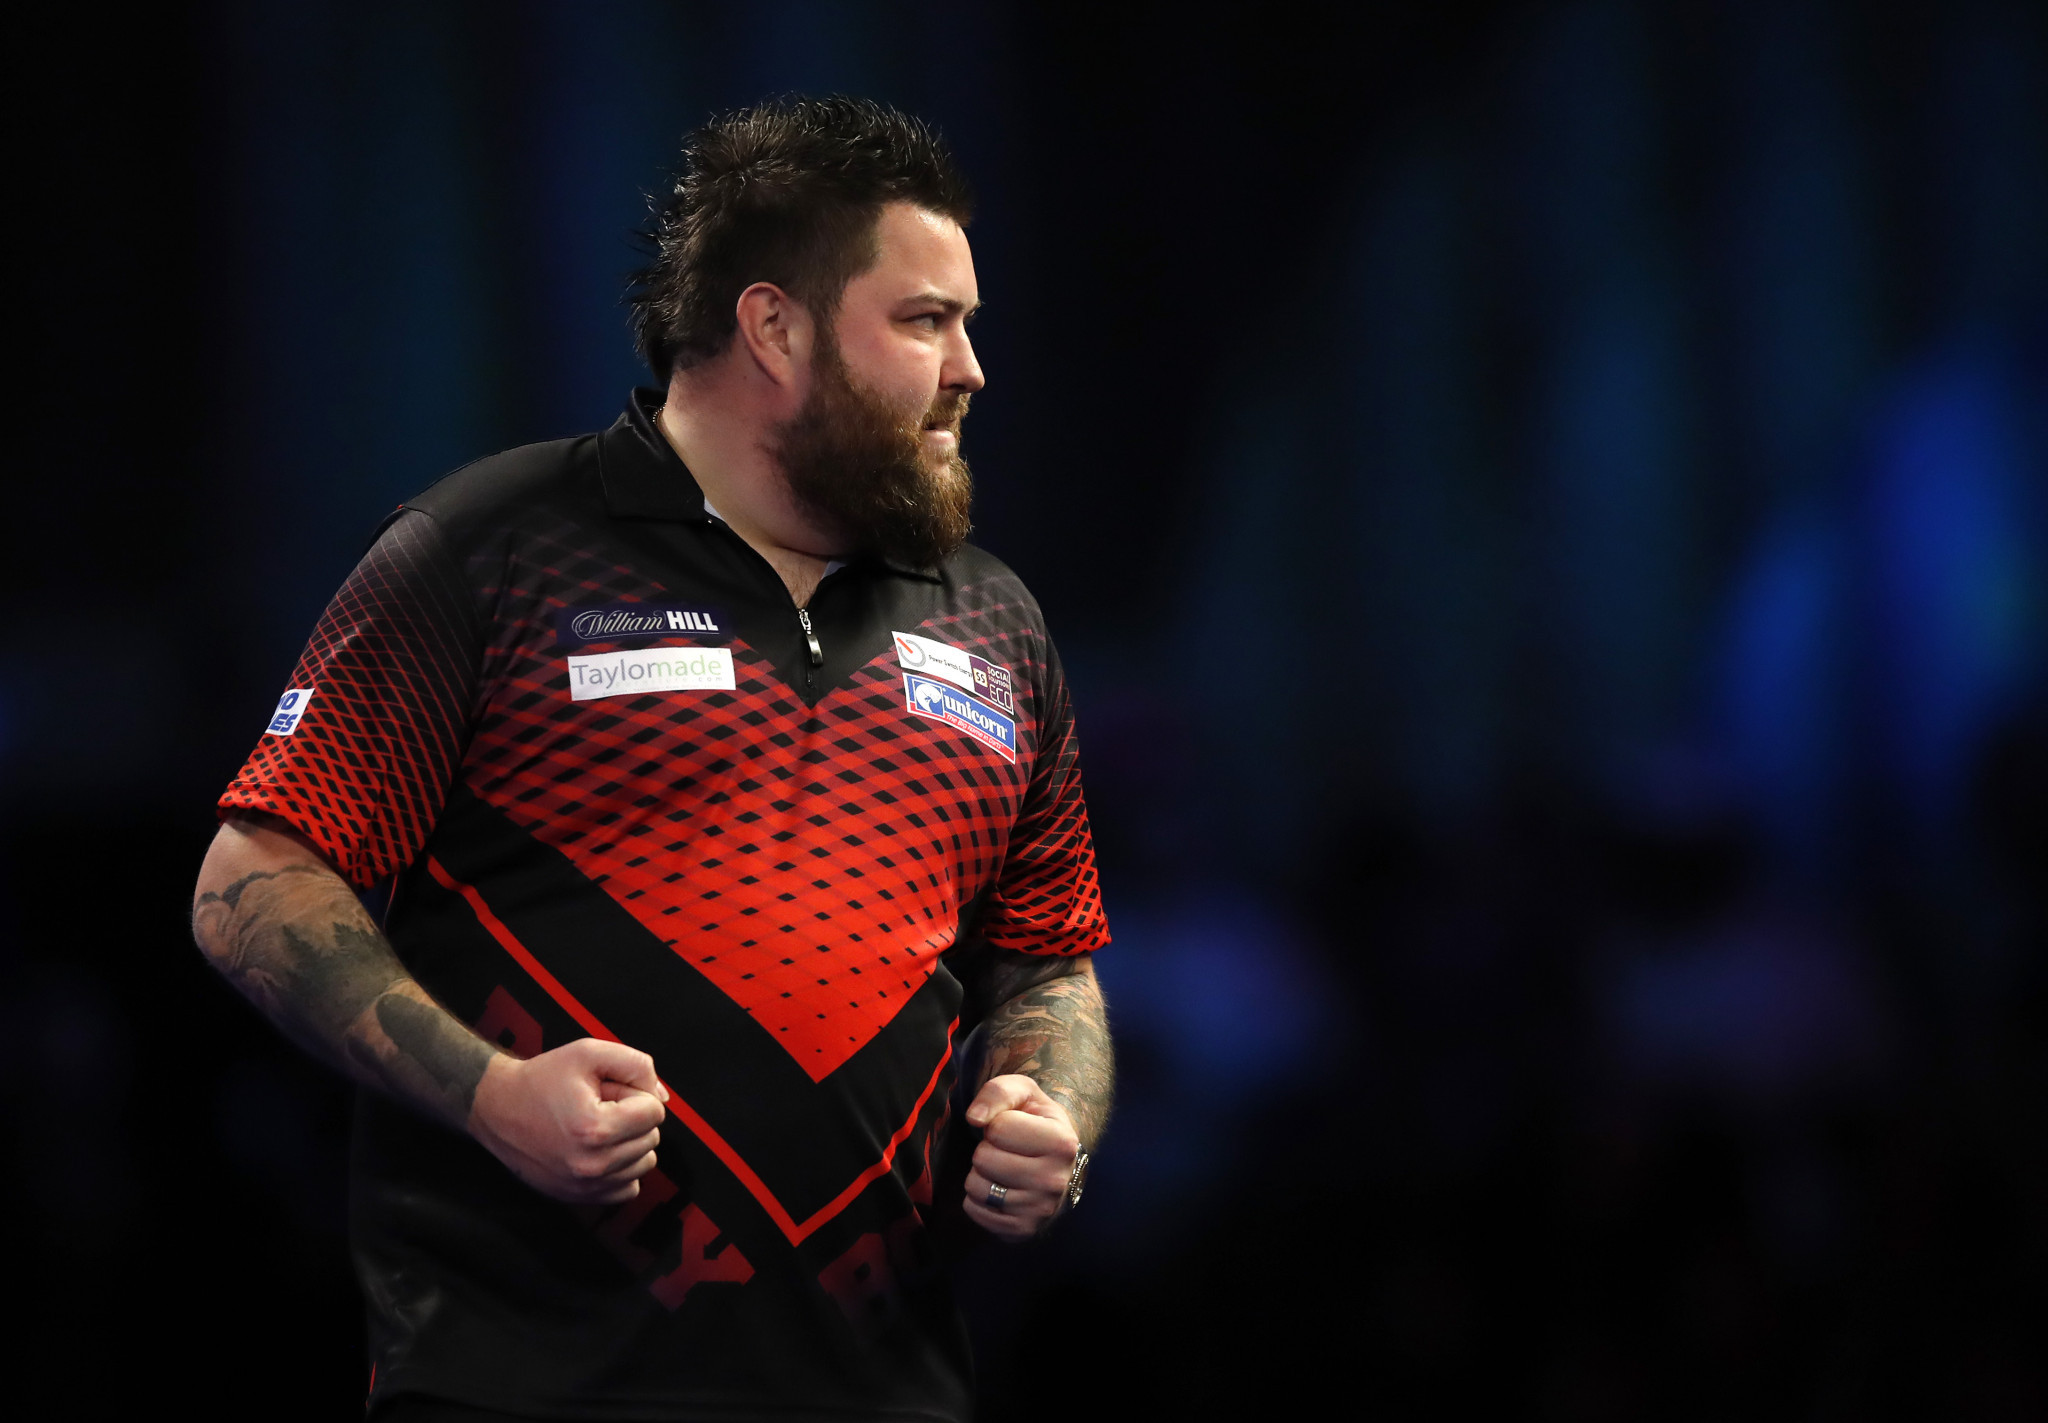 Michael Smith reached his second PDC World Championship final after overcoming fellow Englishman James Wade ©Getty Images 